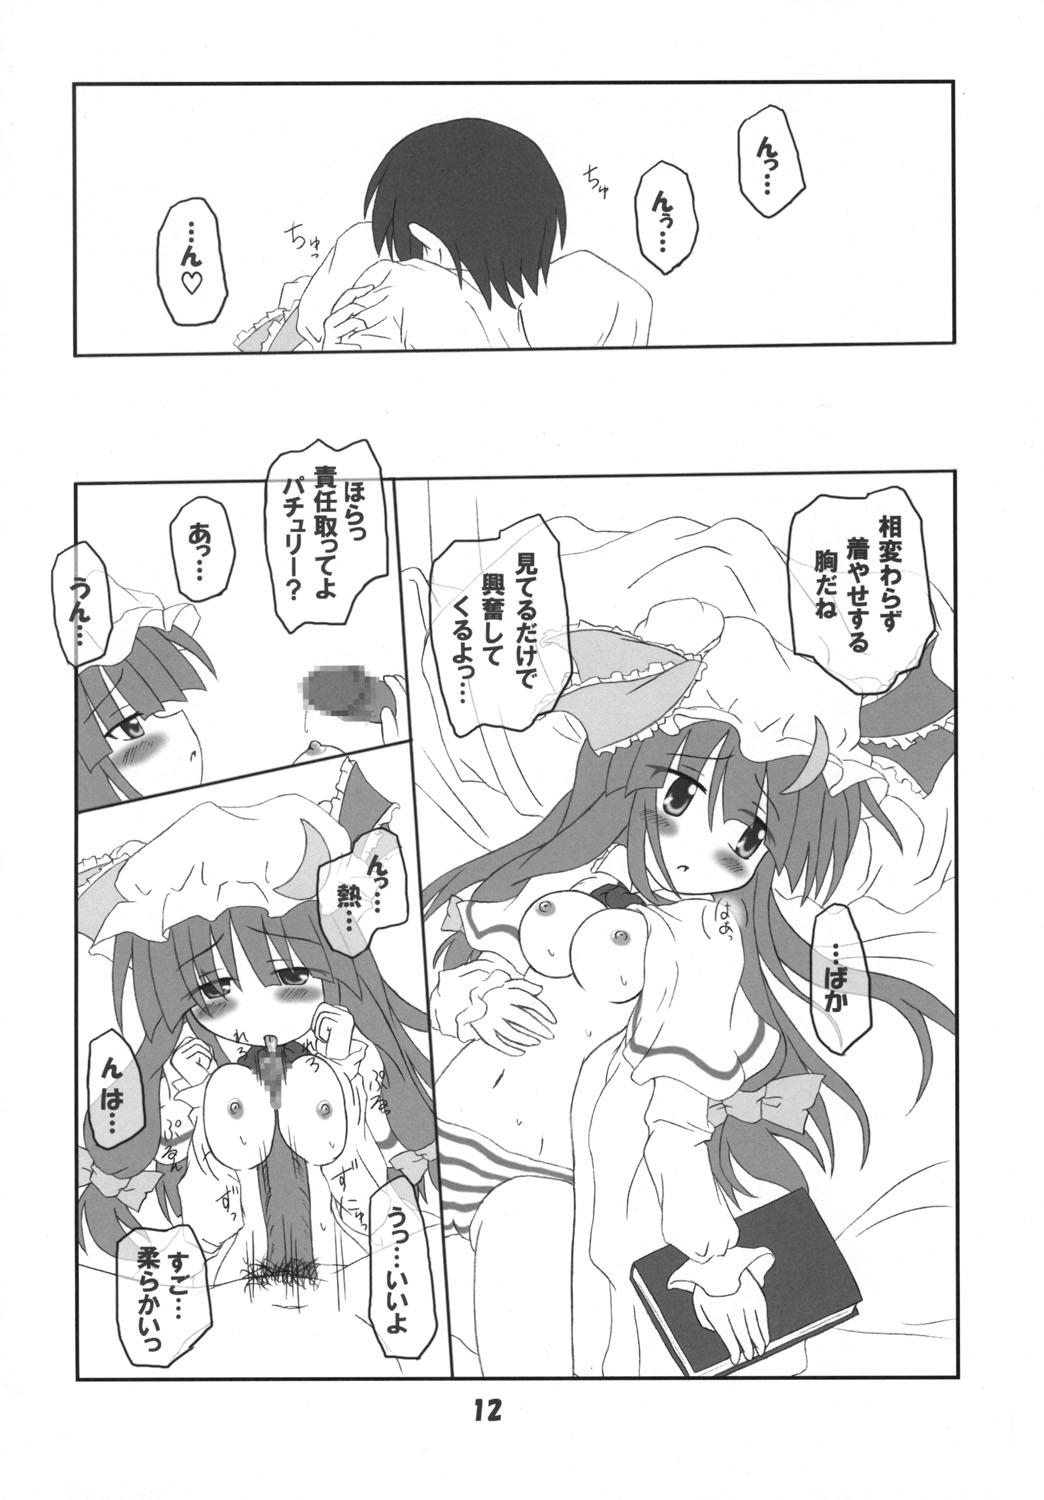 Flashing Rollin 18 - Touhou project Amateurs Gone - Page 11